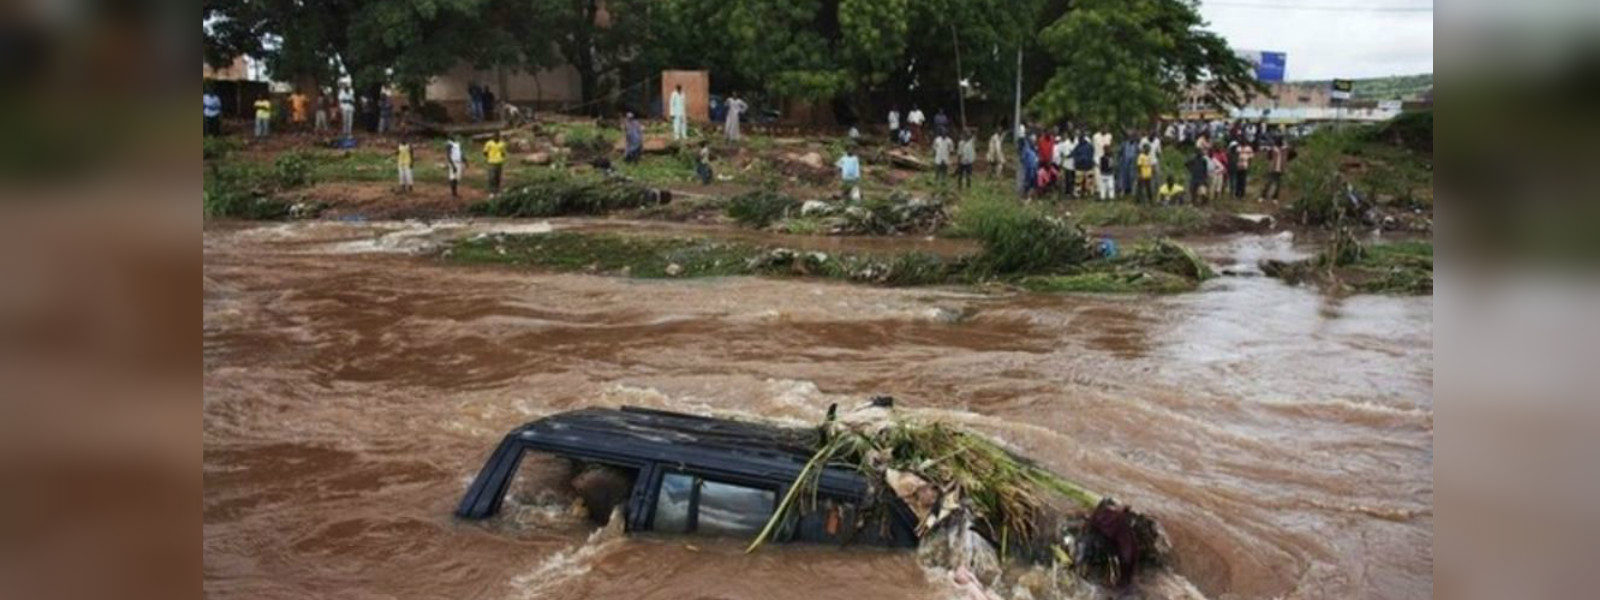 At least 15 killed in Mali floods